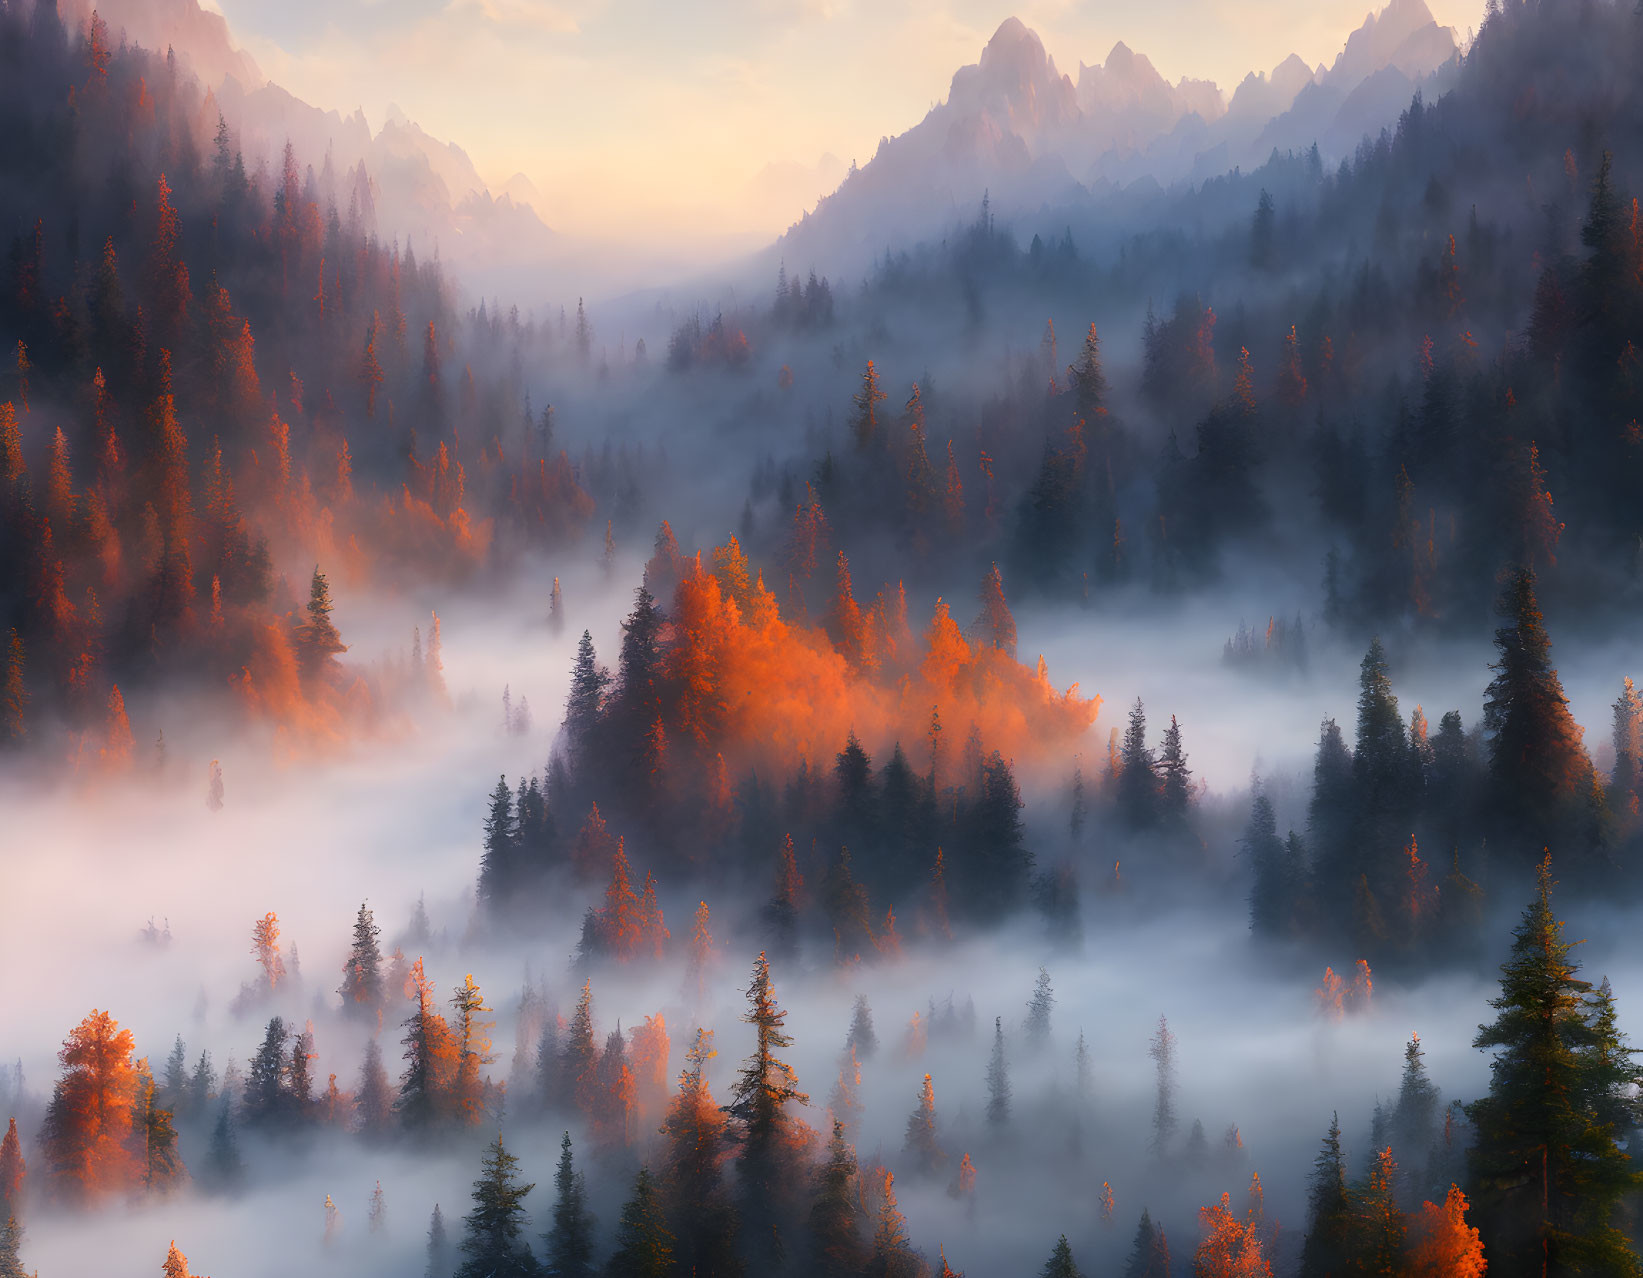 Sunlit Misty Forest at Sunrise with Mountain Peaks